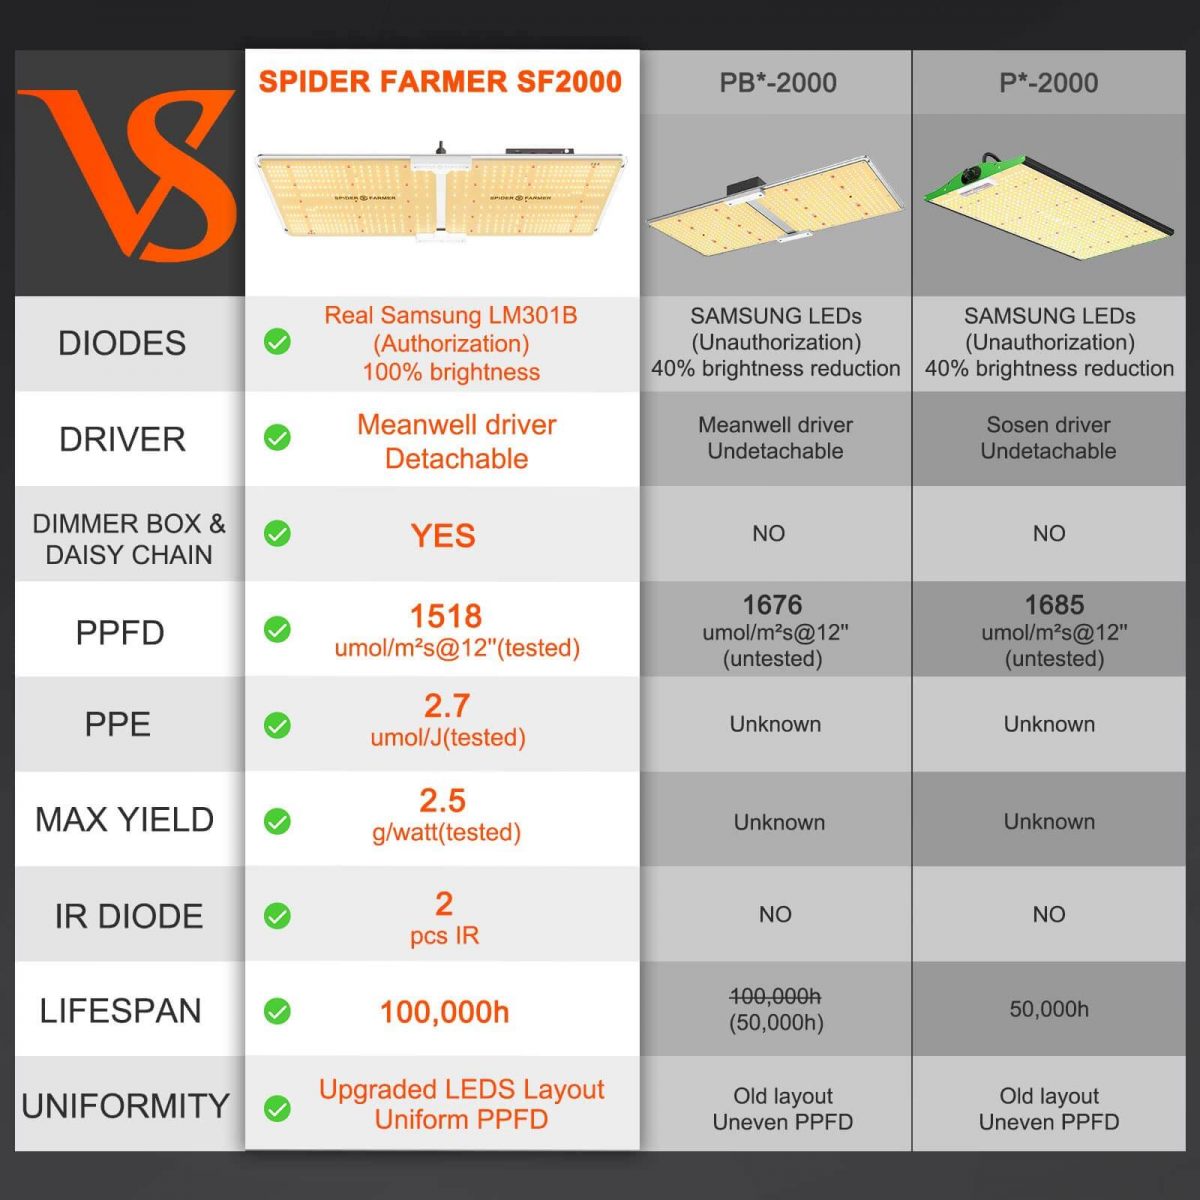 Spider Farmer SF2000 compare with other brand